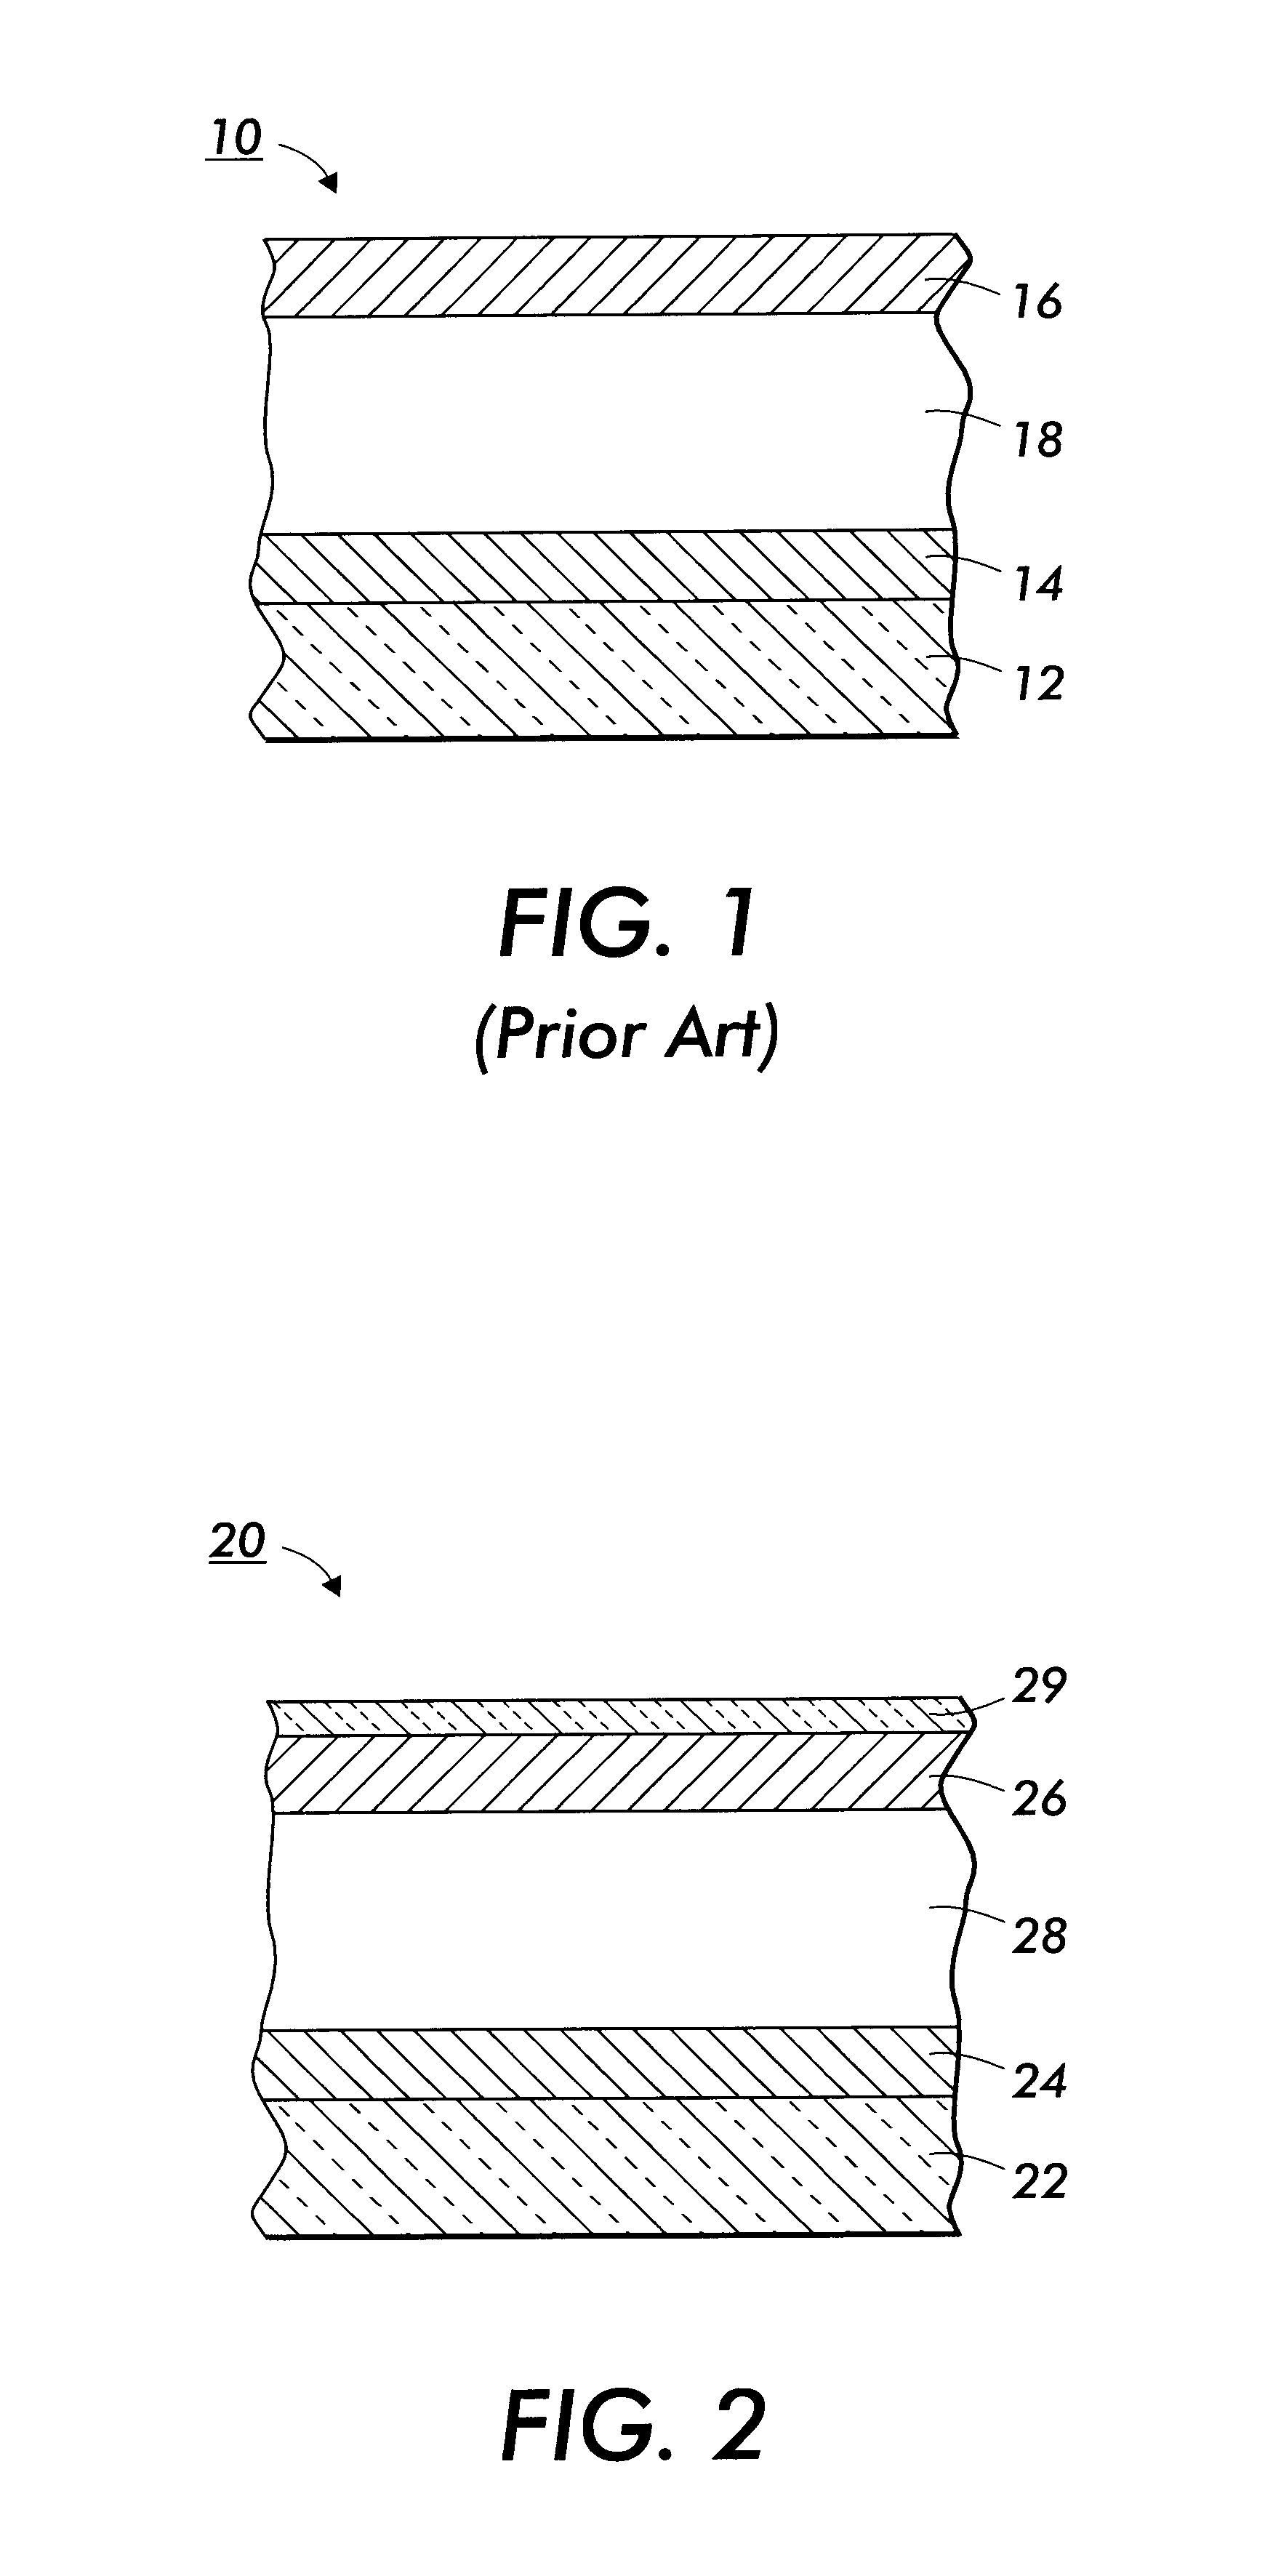 Electroluminescent devices containing thermal protective layers